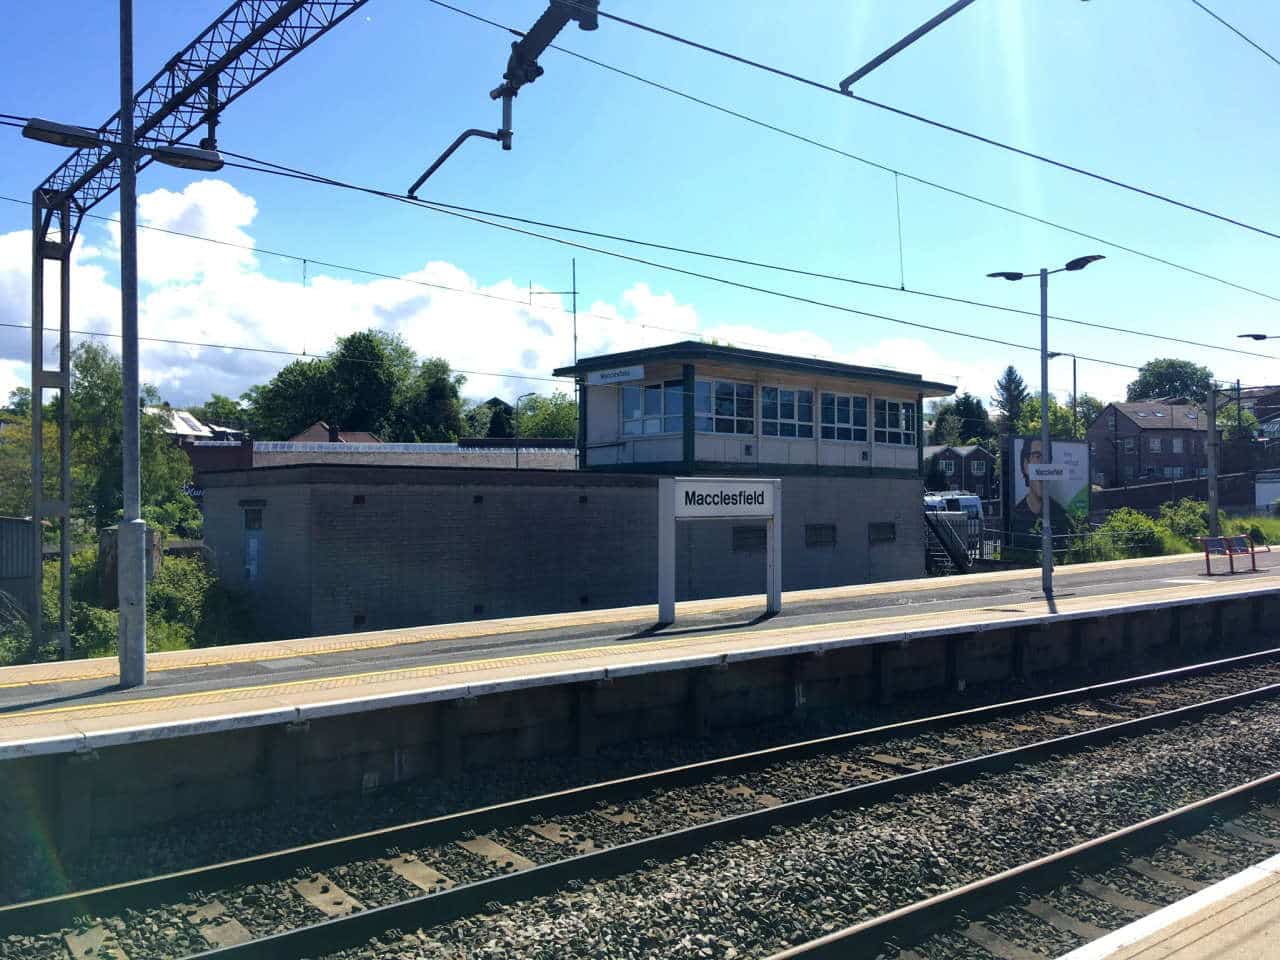 Macclesfield station sign